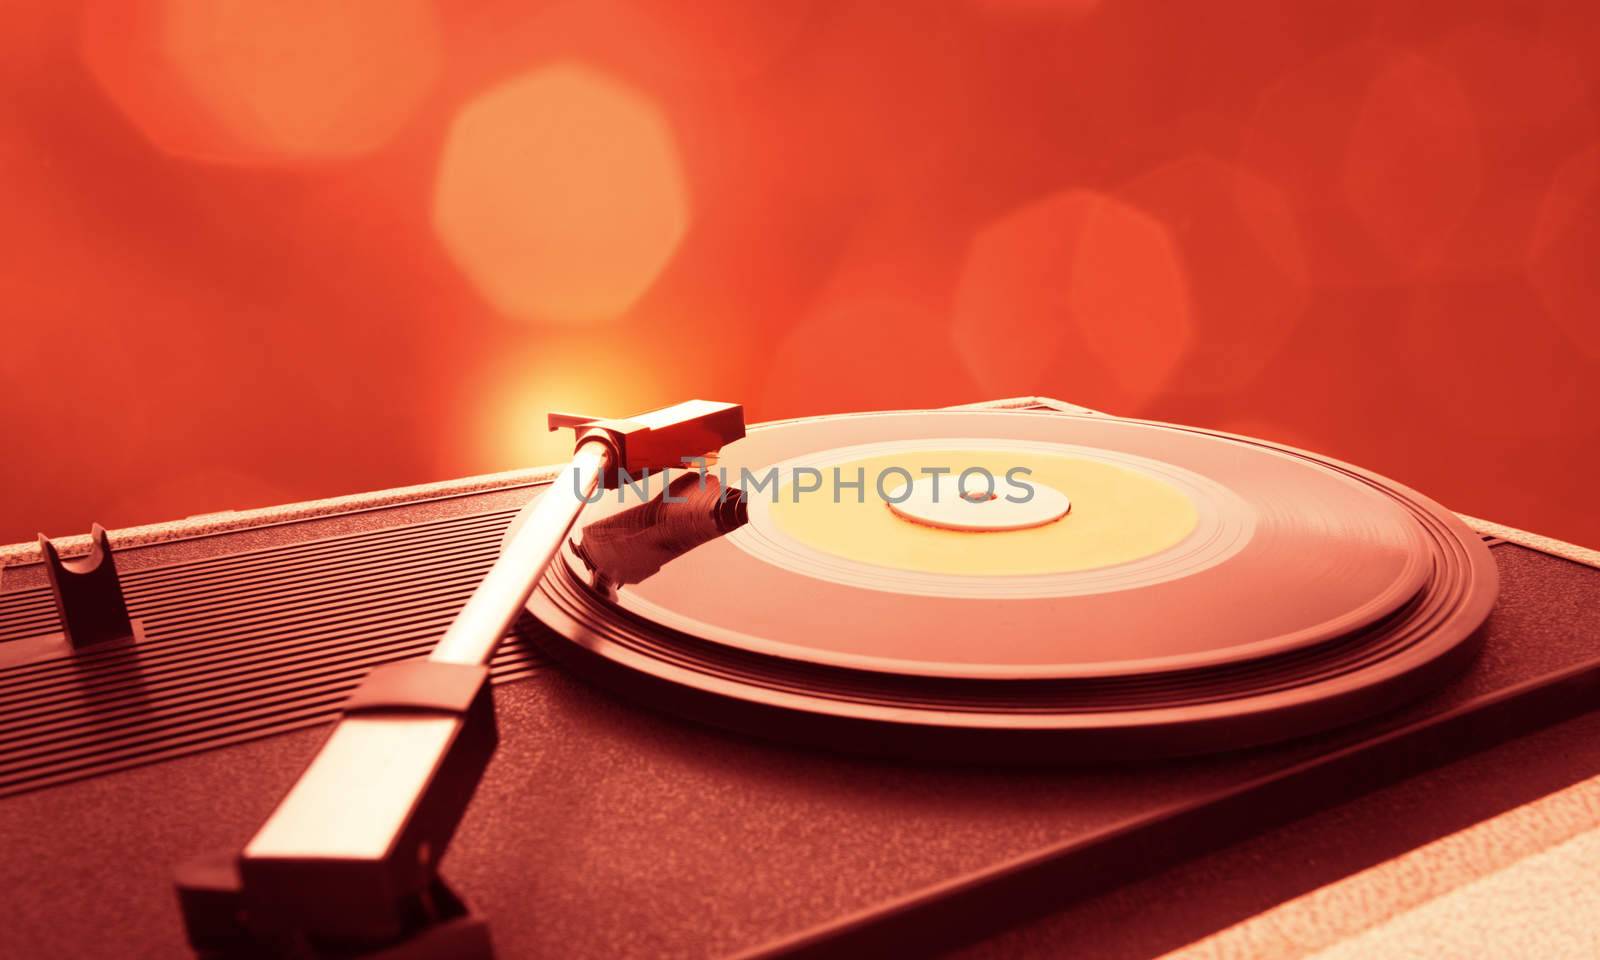 A vinyl record is spinning on the turntable